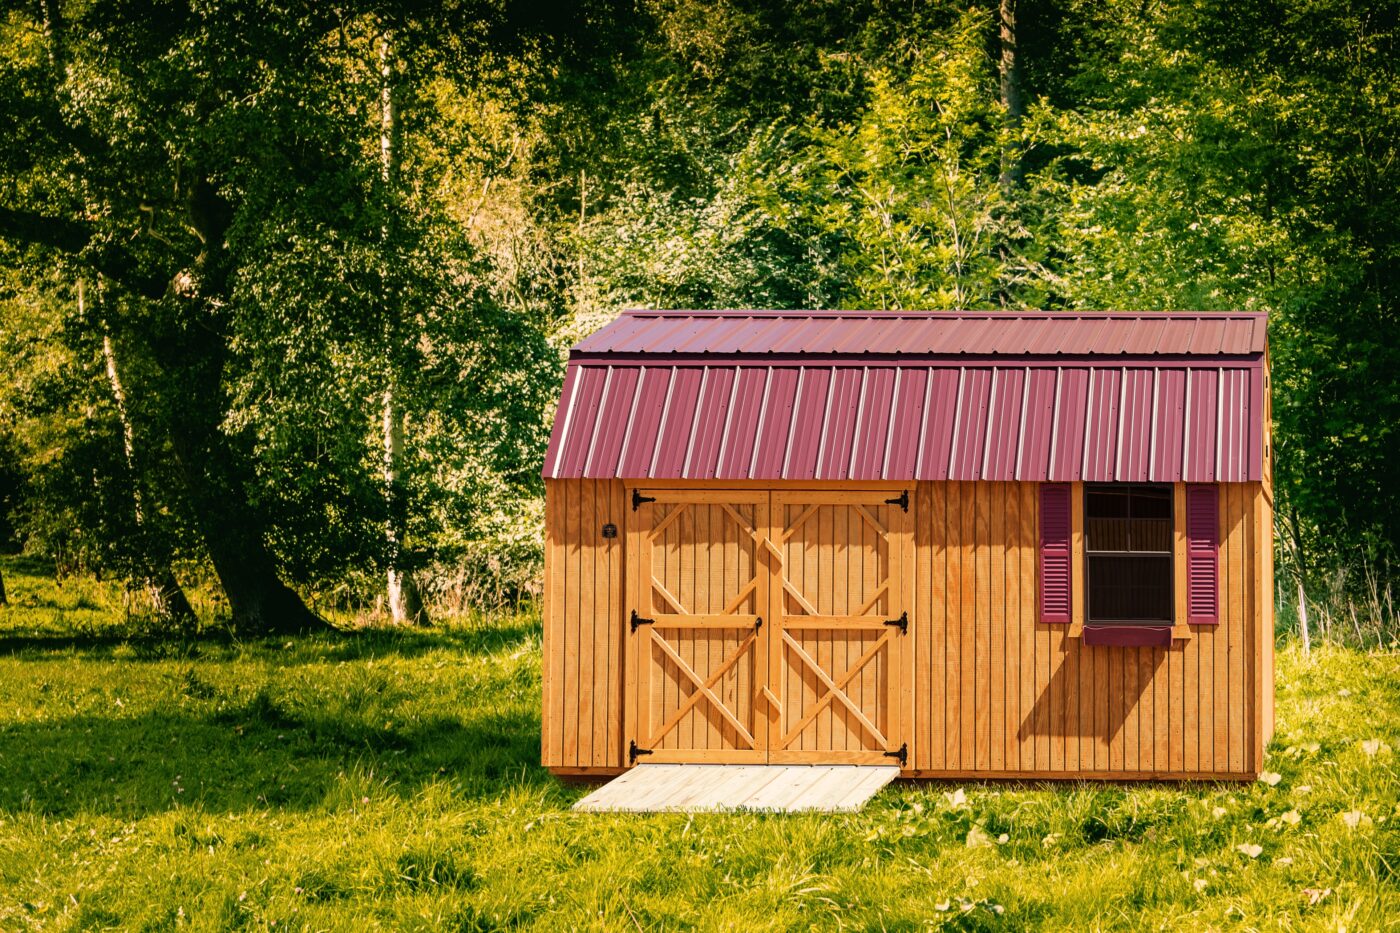 12 Shed Ideas
